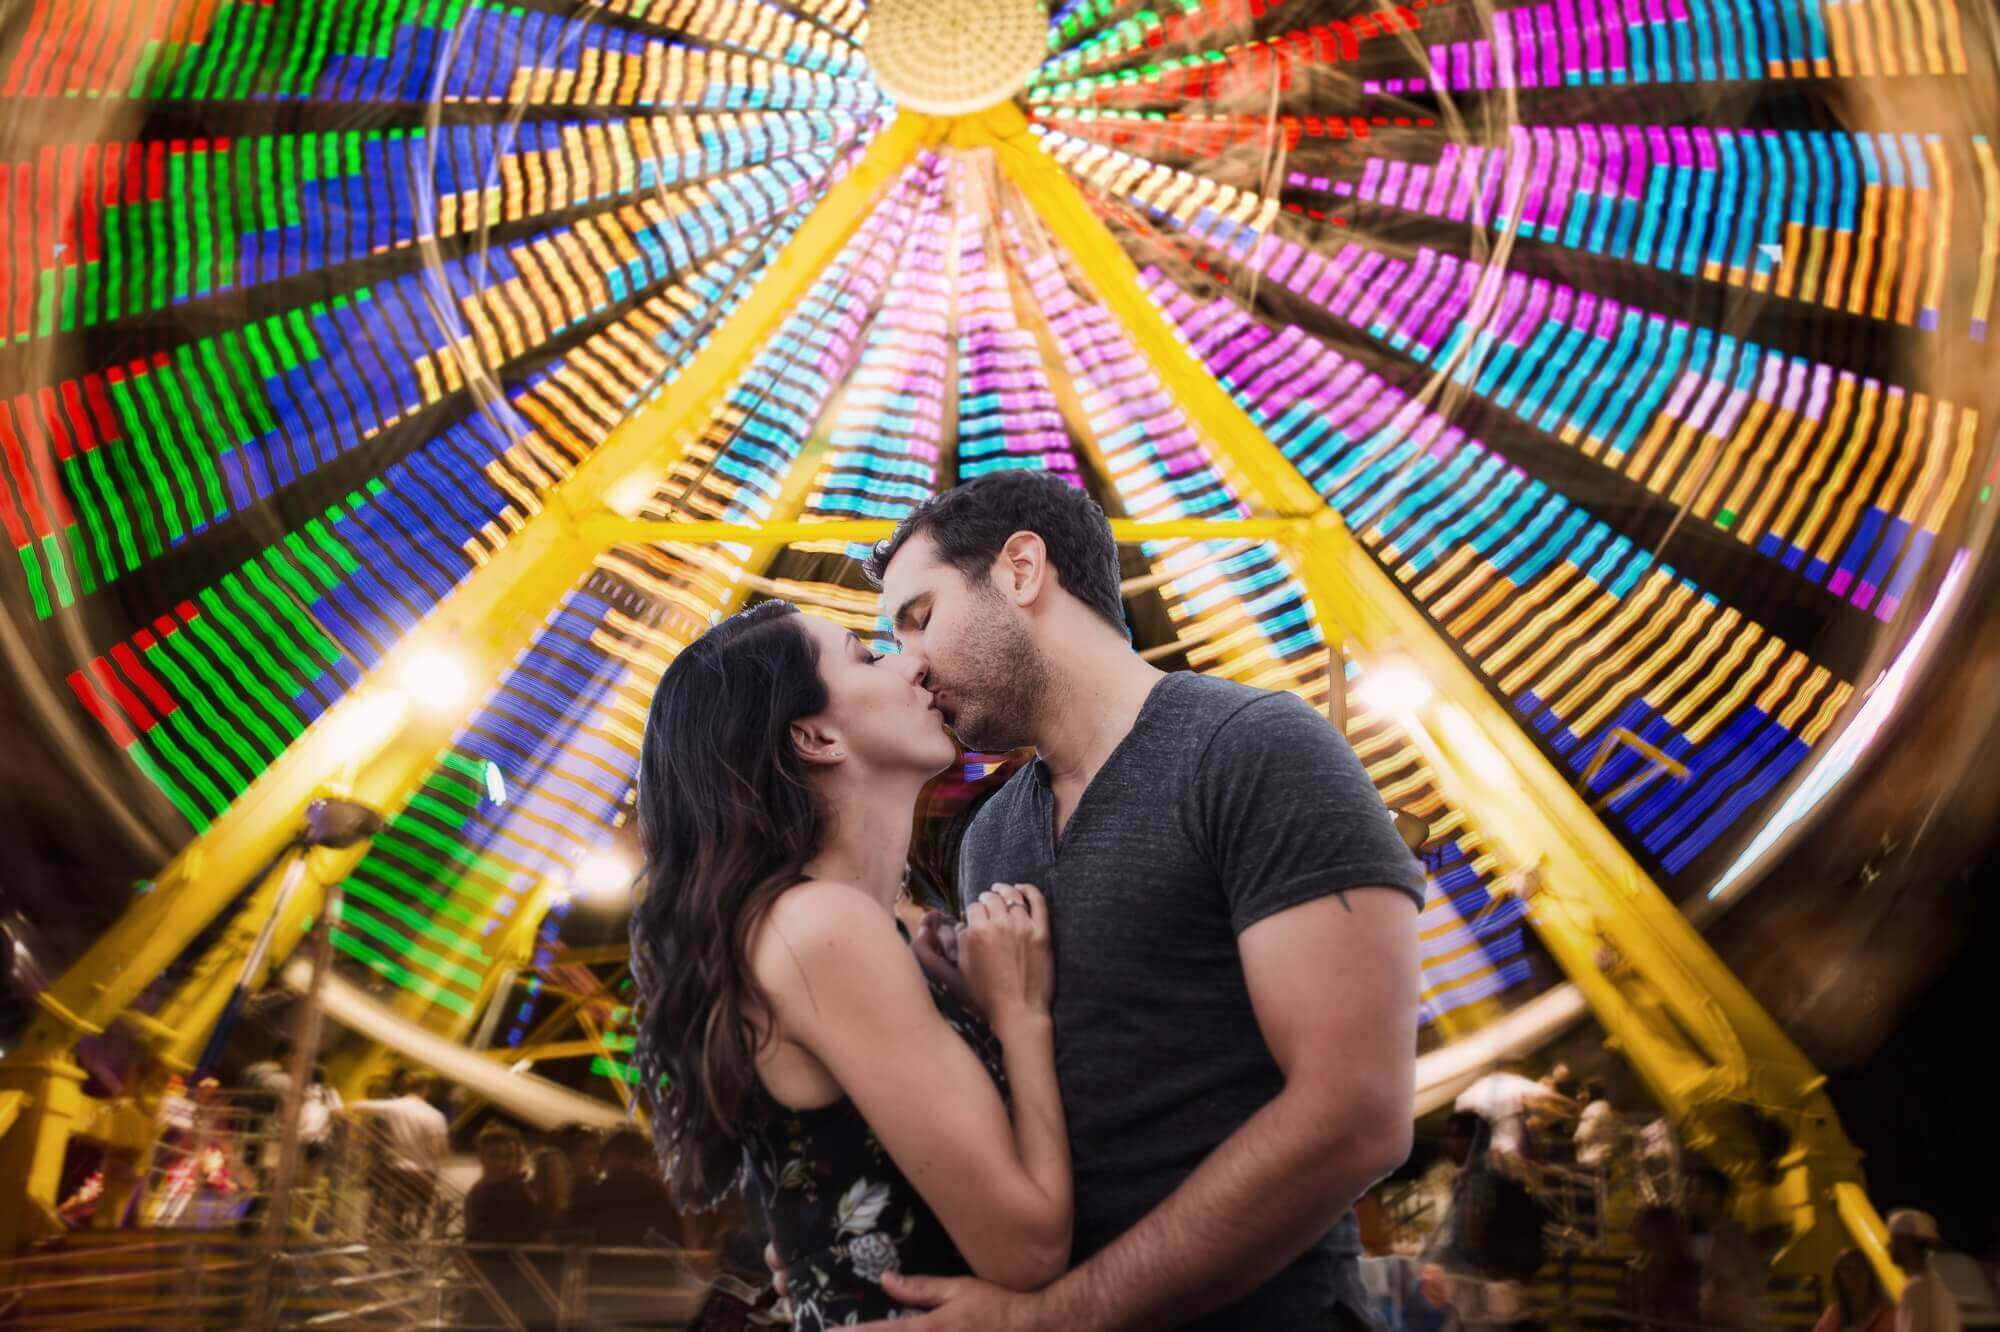 Toronto's CNE farris wheel used as a stunningly colourful background for a couple sharing a kiss